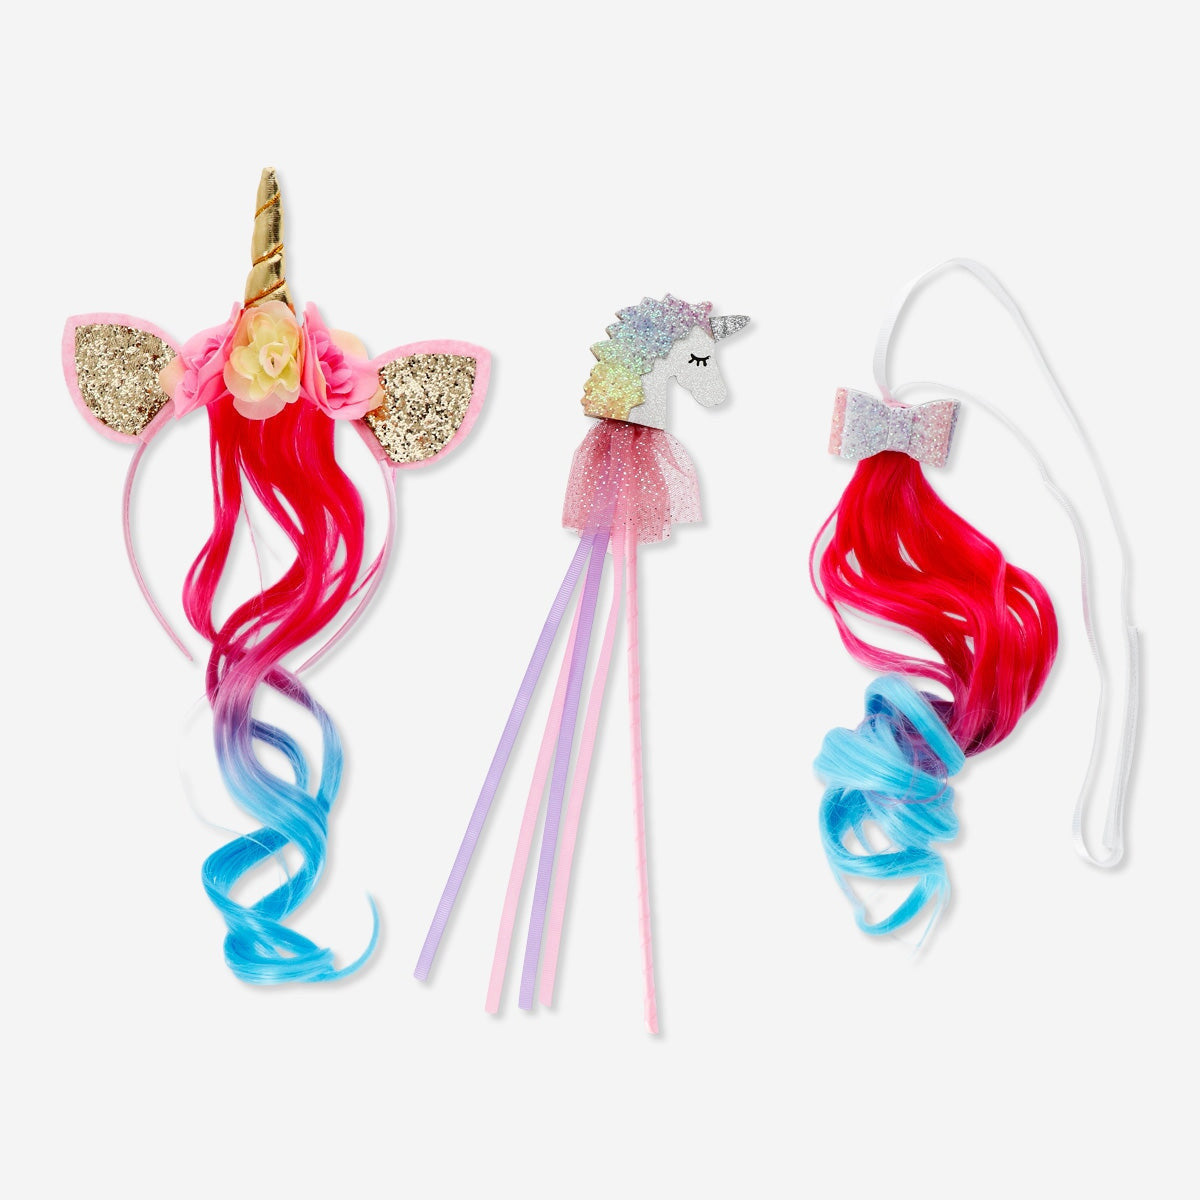 Unicorn costume accessories. For kids Party Flying Tiger Copenhagen 